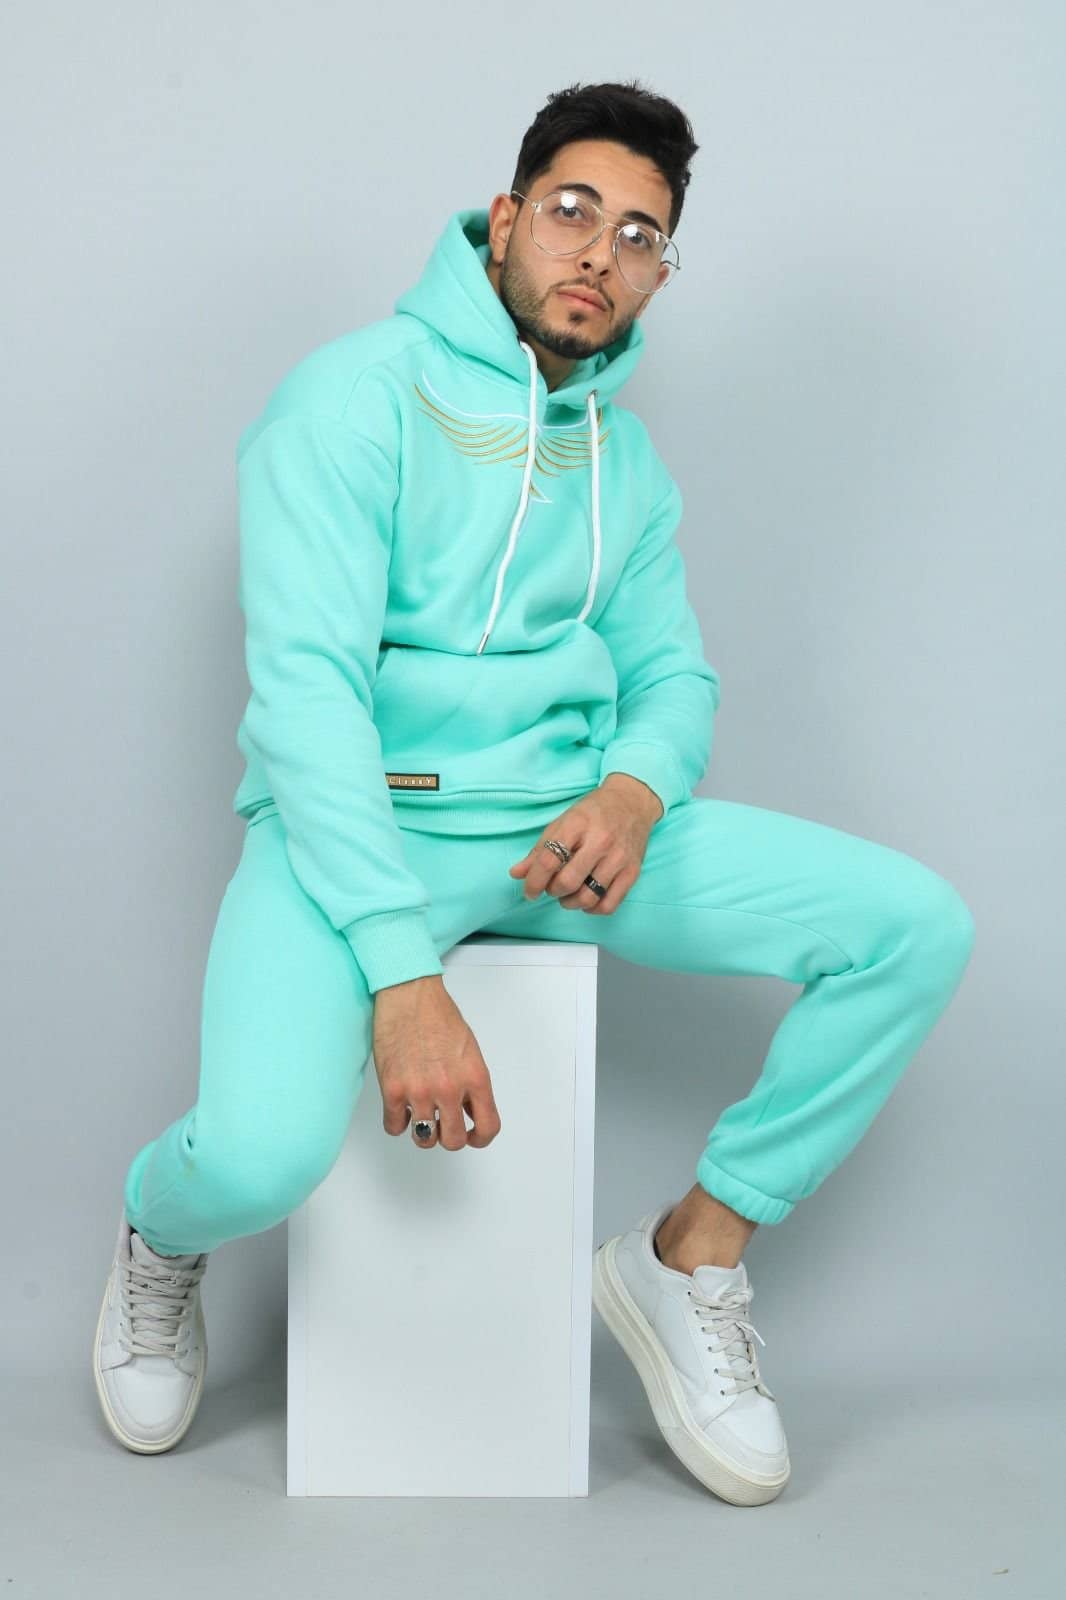 Mens European Fashion Tracksuit Set With Lime Green Hoodie And Pants Casual  Sportswear For A Stylish Look From Yuedanya, $20.32